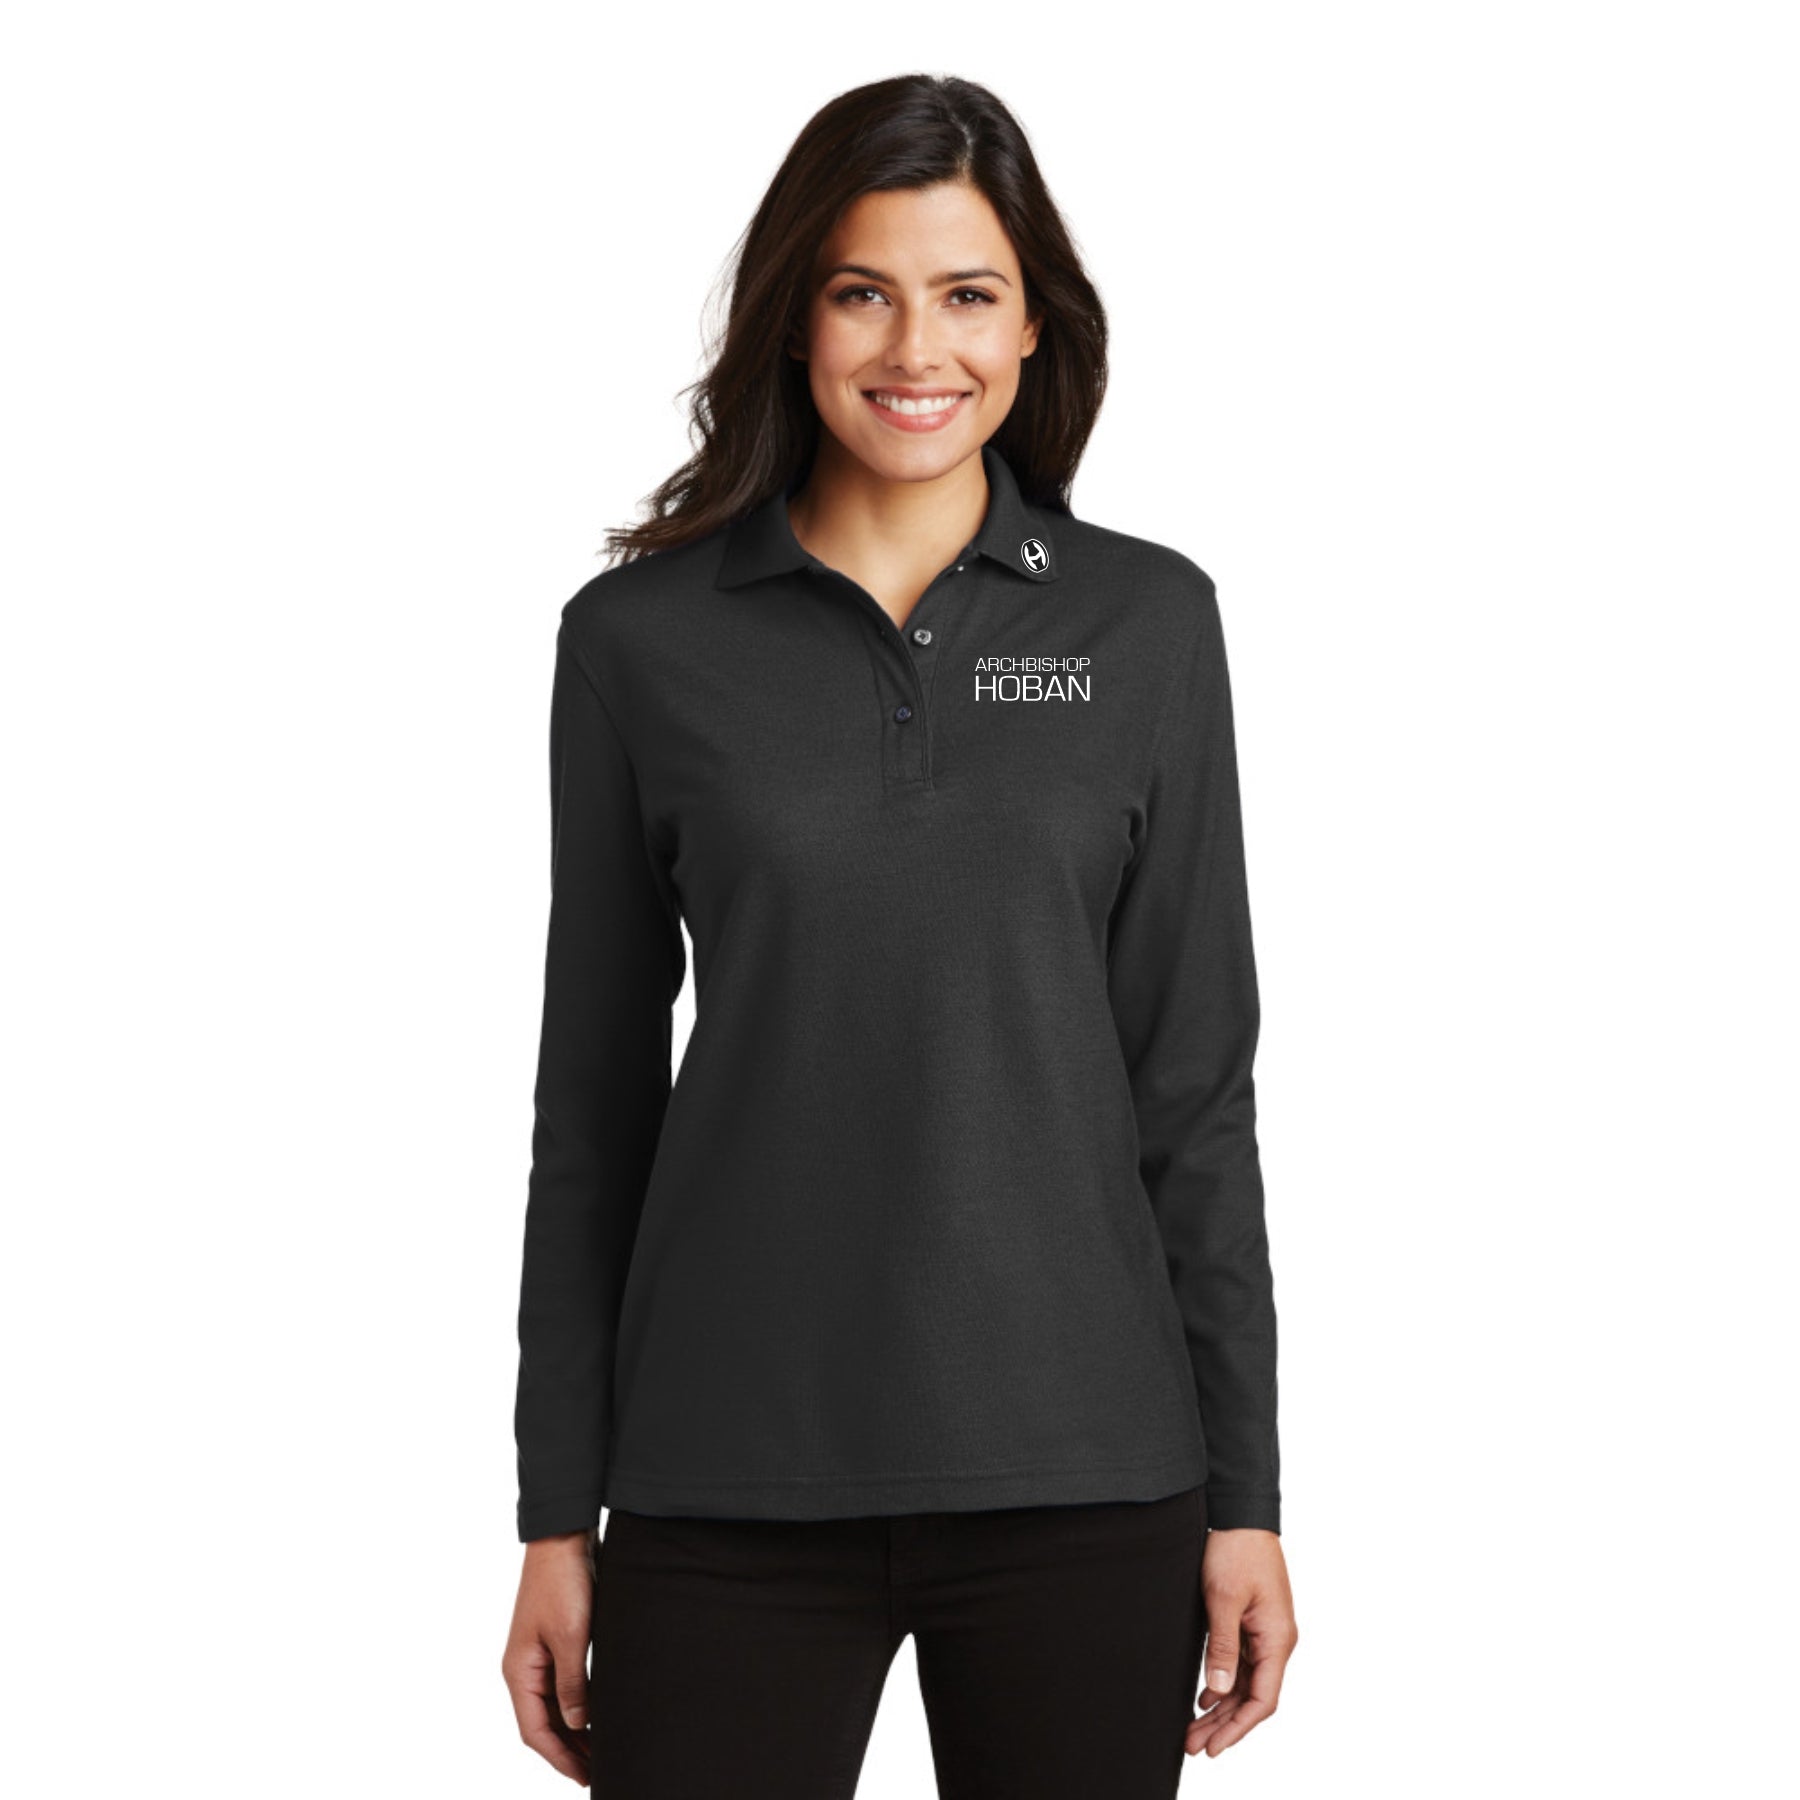 Ladies Long Sleeve Polo Shirt by Port Authority (click for more color options)